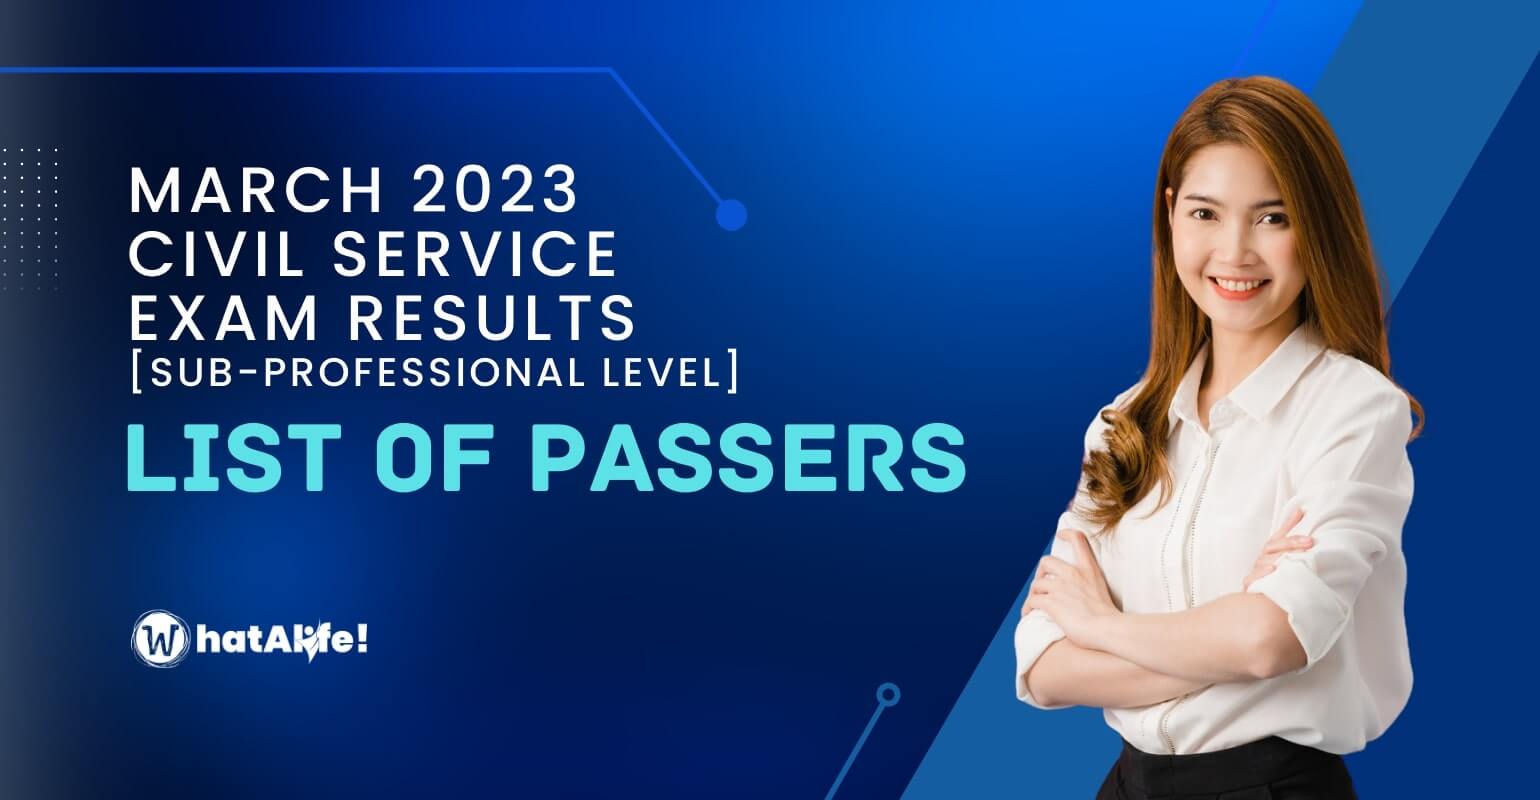 list of passers march 2023 civil service exam results sub professional level